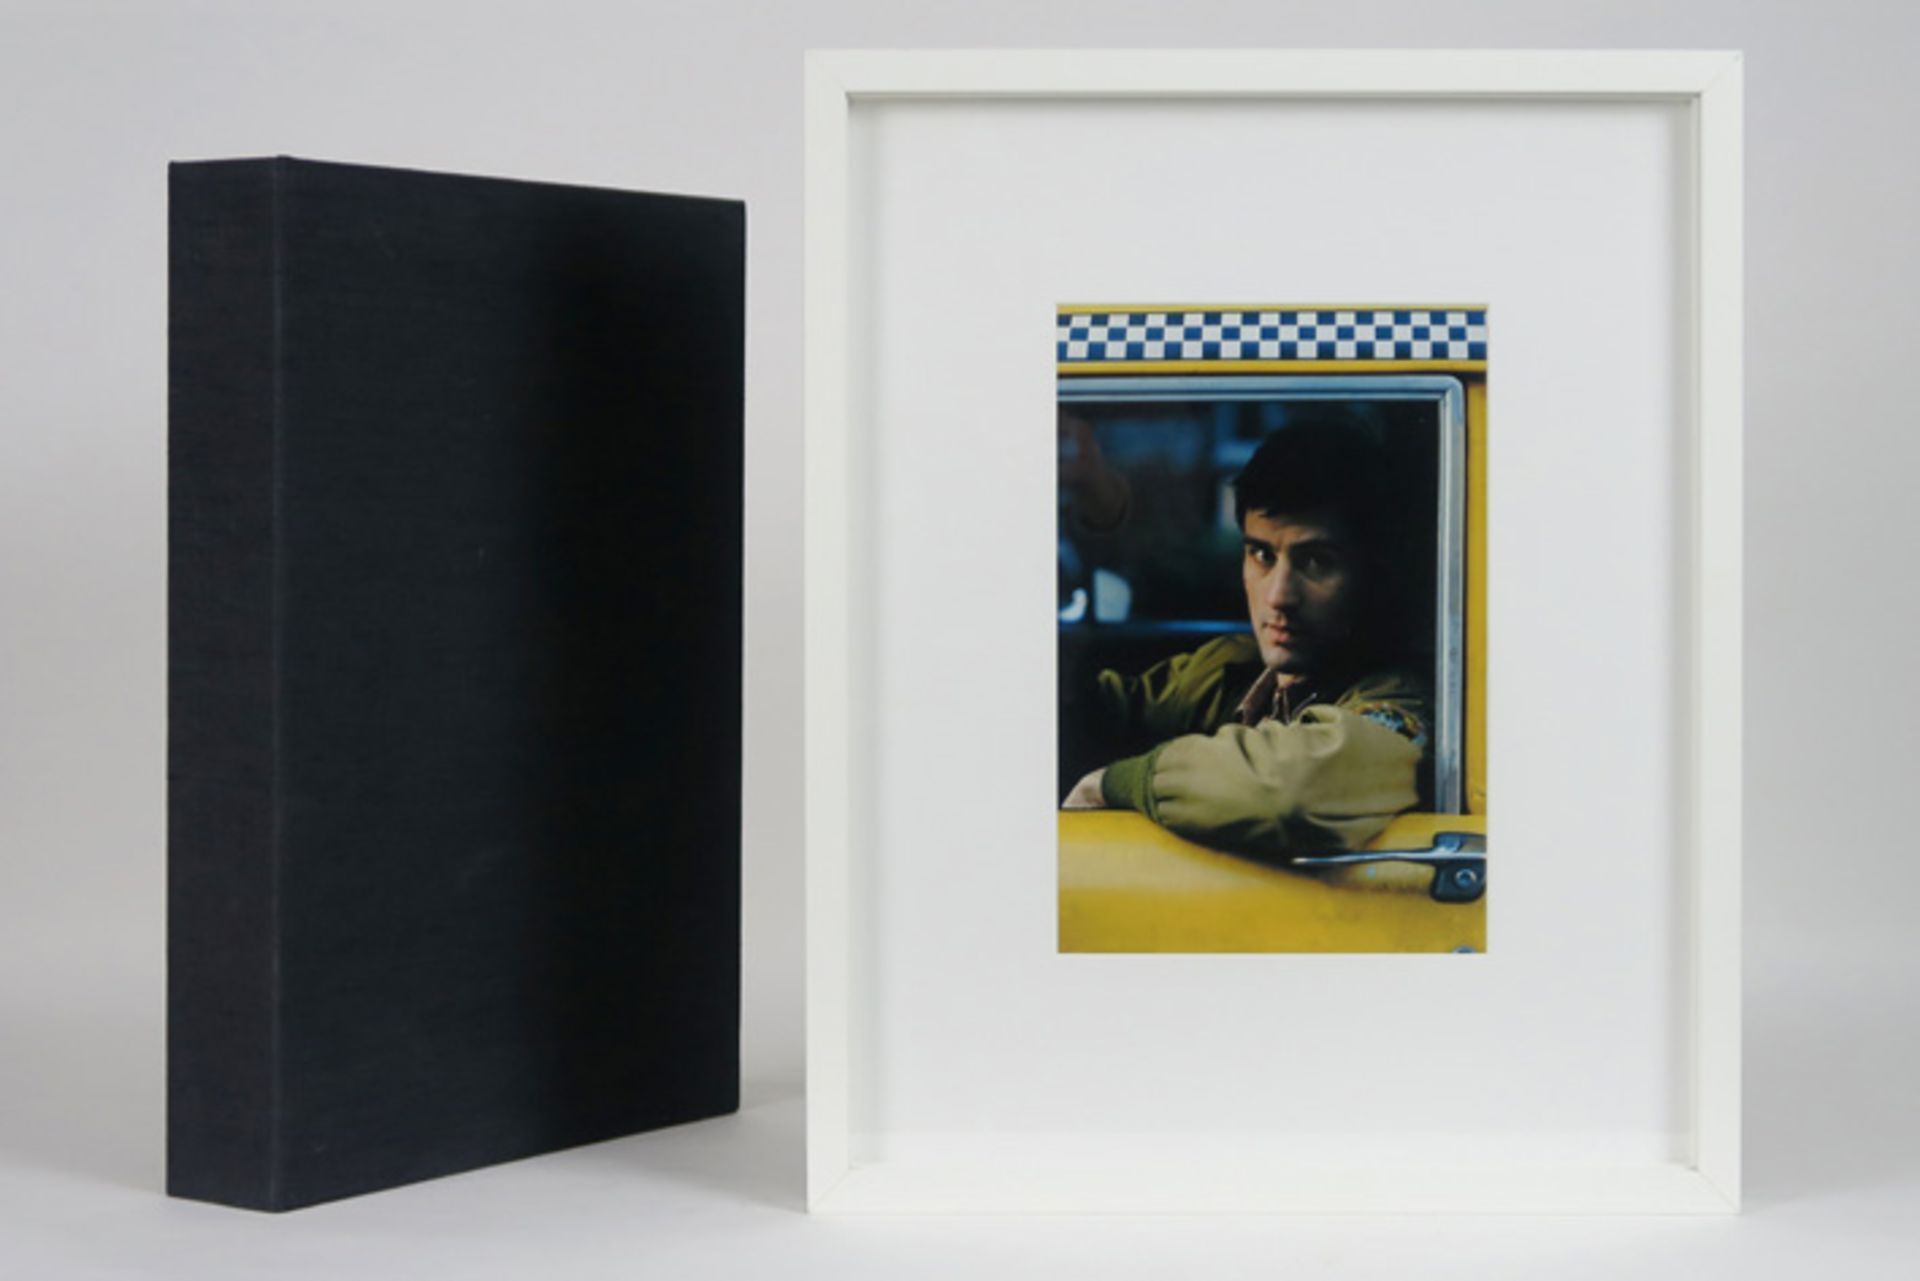 "Taschen" luxury edition of the book "Taxi Driver" with a framed photograph of Robert de Niro by Sha